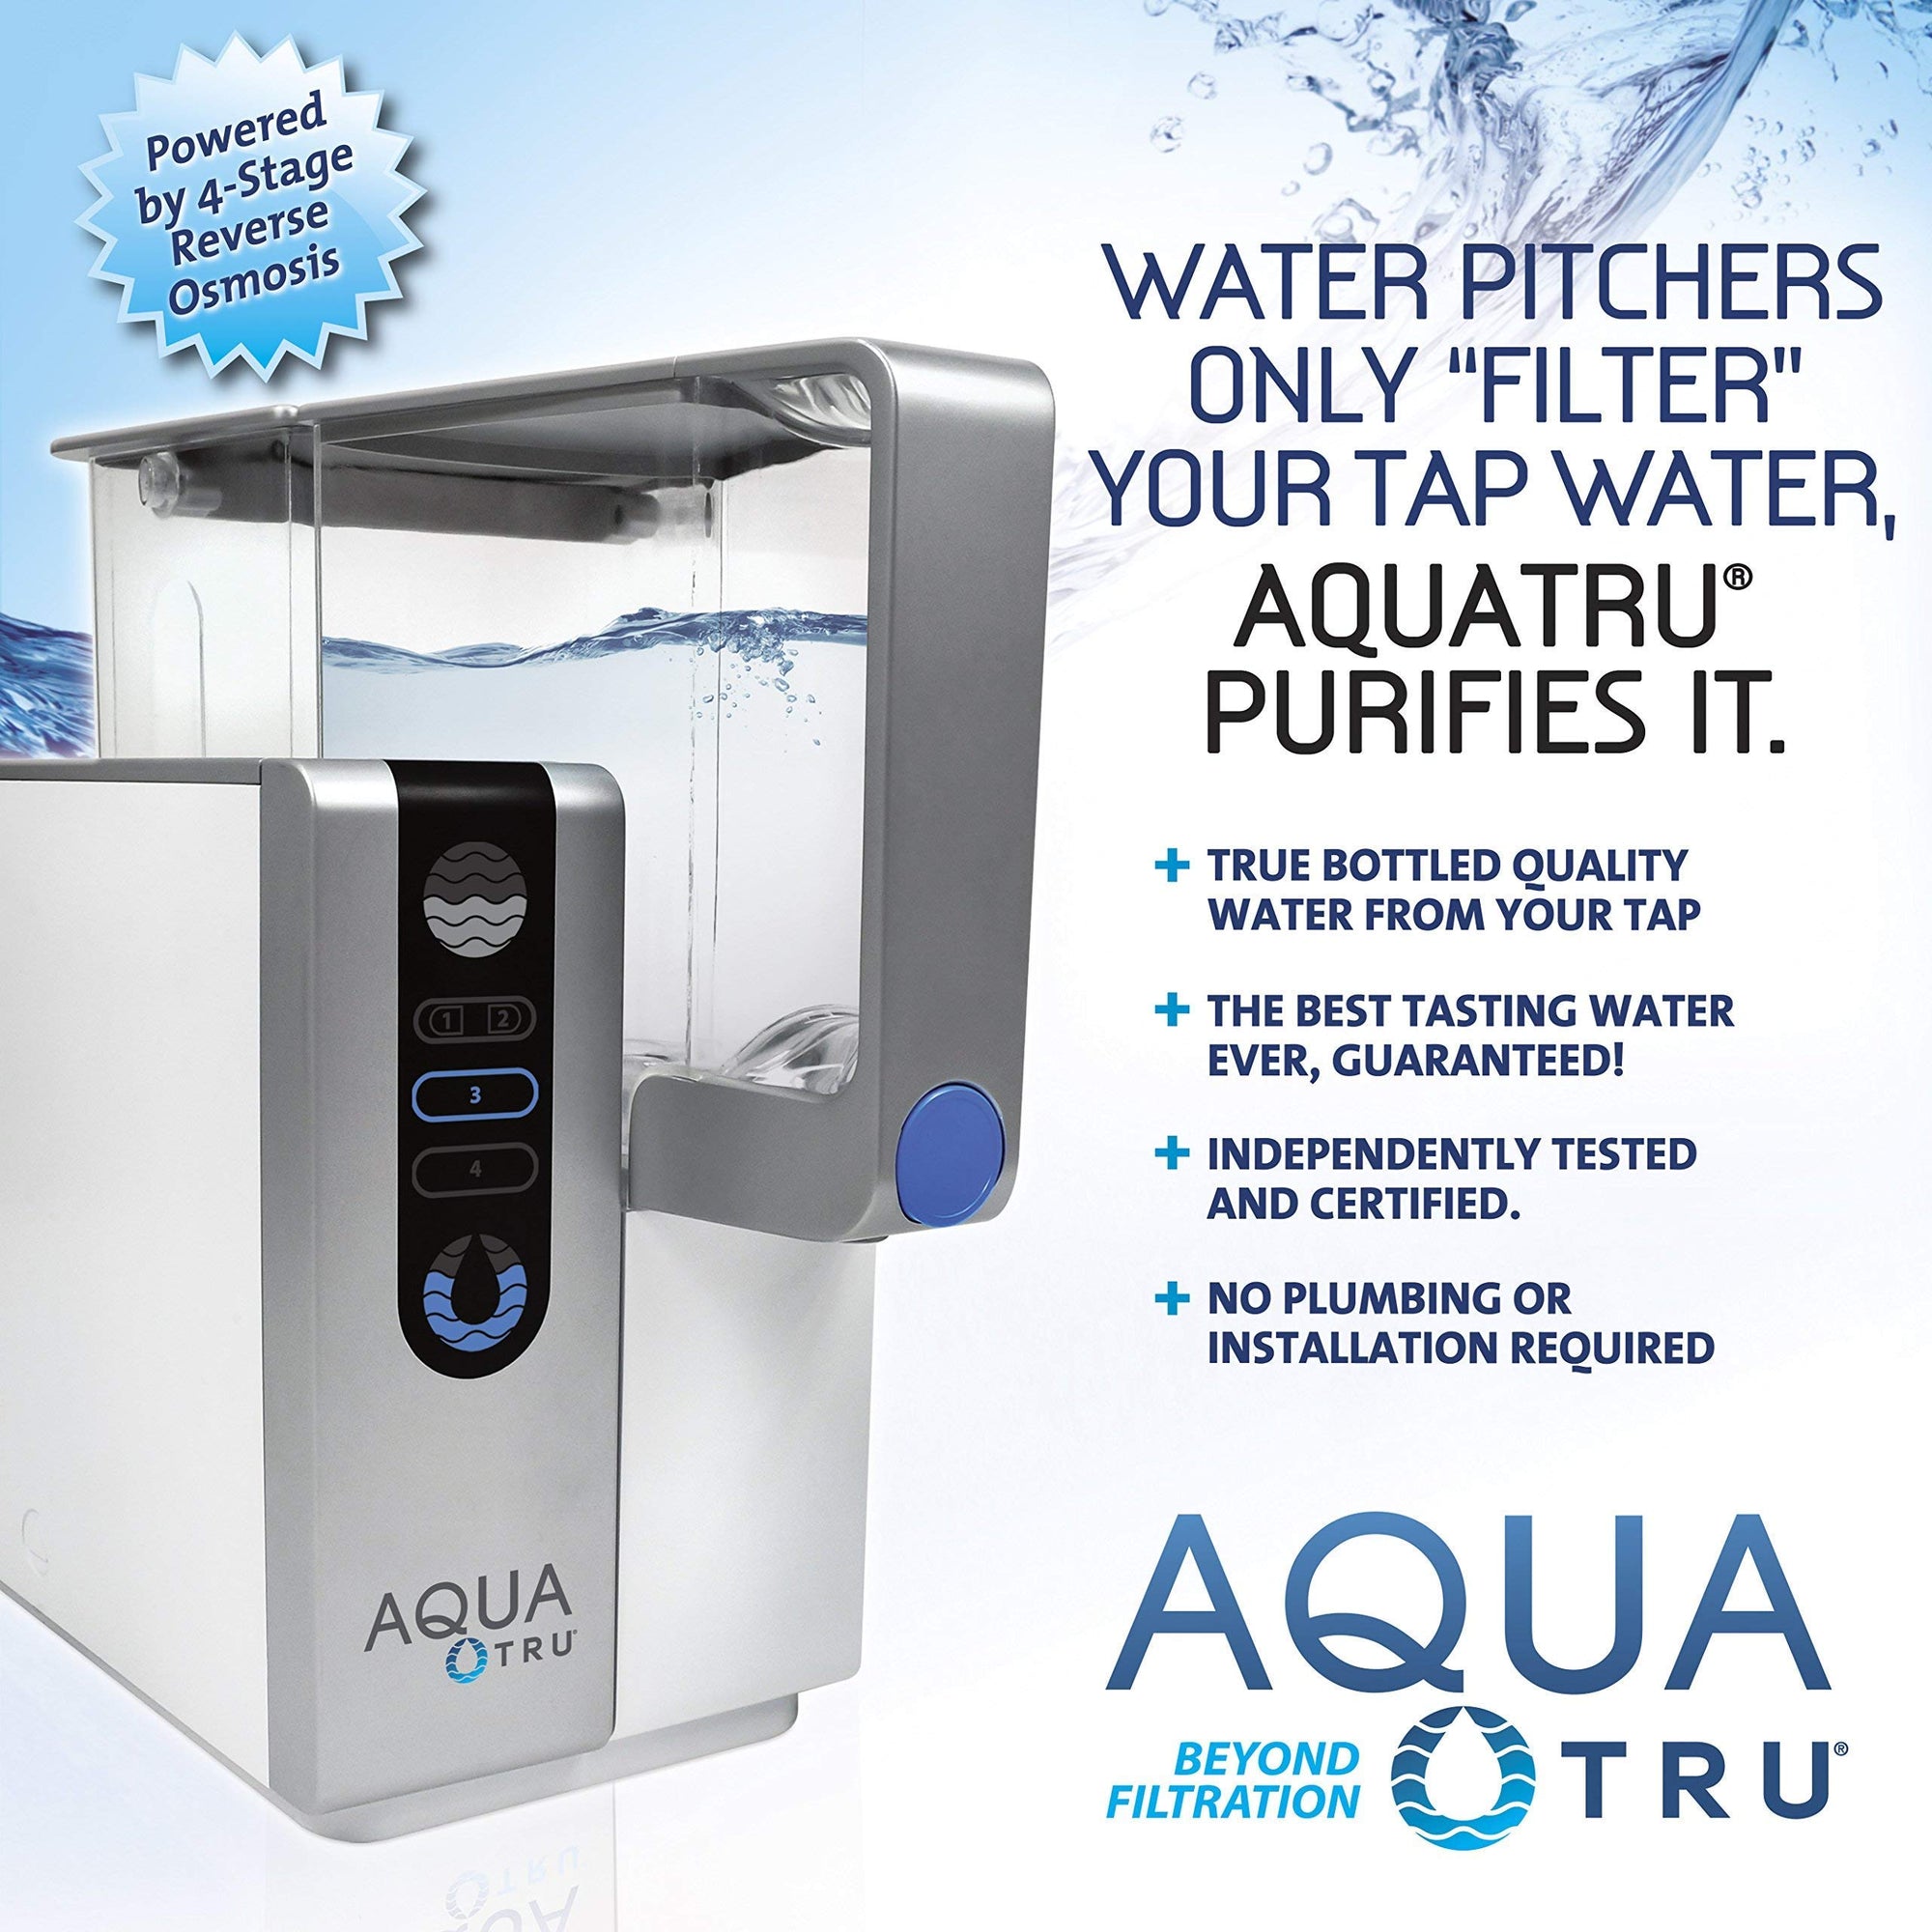 AQUA TRU Countertop Water Filtration reversee Osmosis Purification System